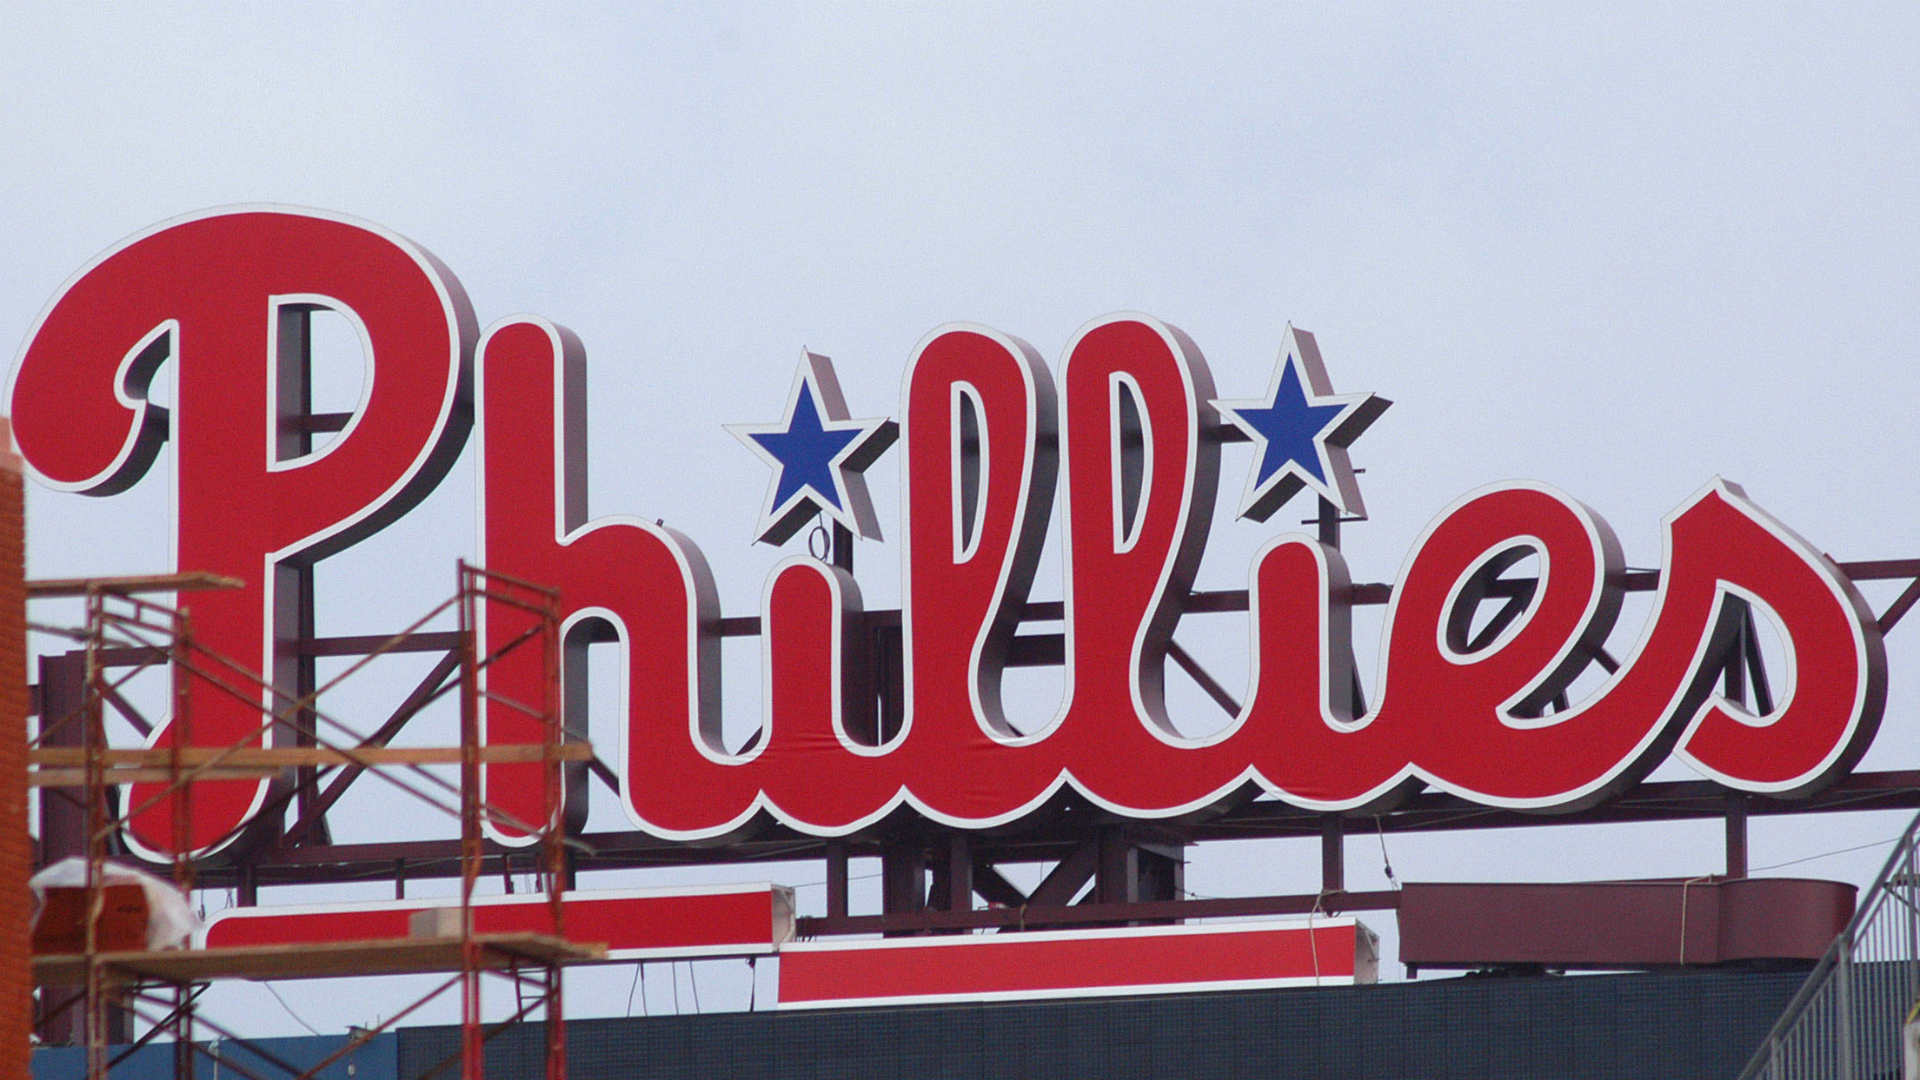 Philadelphia Phillies Browser Themes And Desktop/iphone - Desktop Philadelphia Phillies Hd - HD Wallpaper 